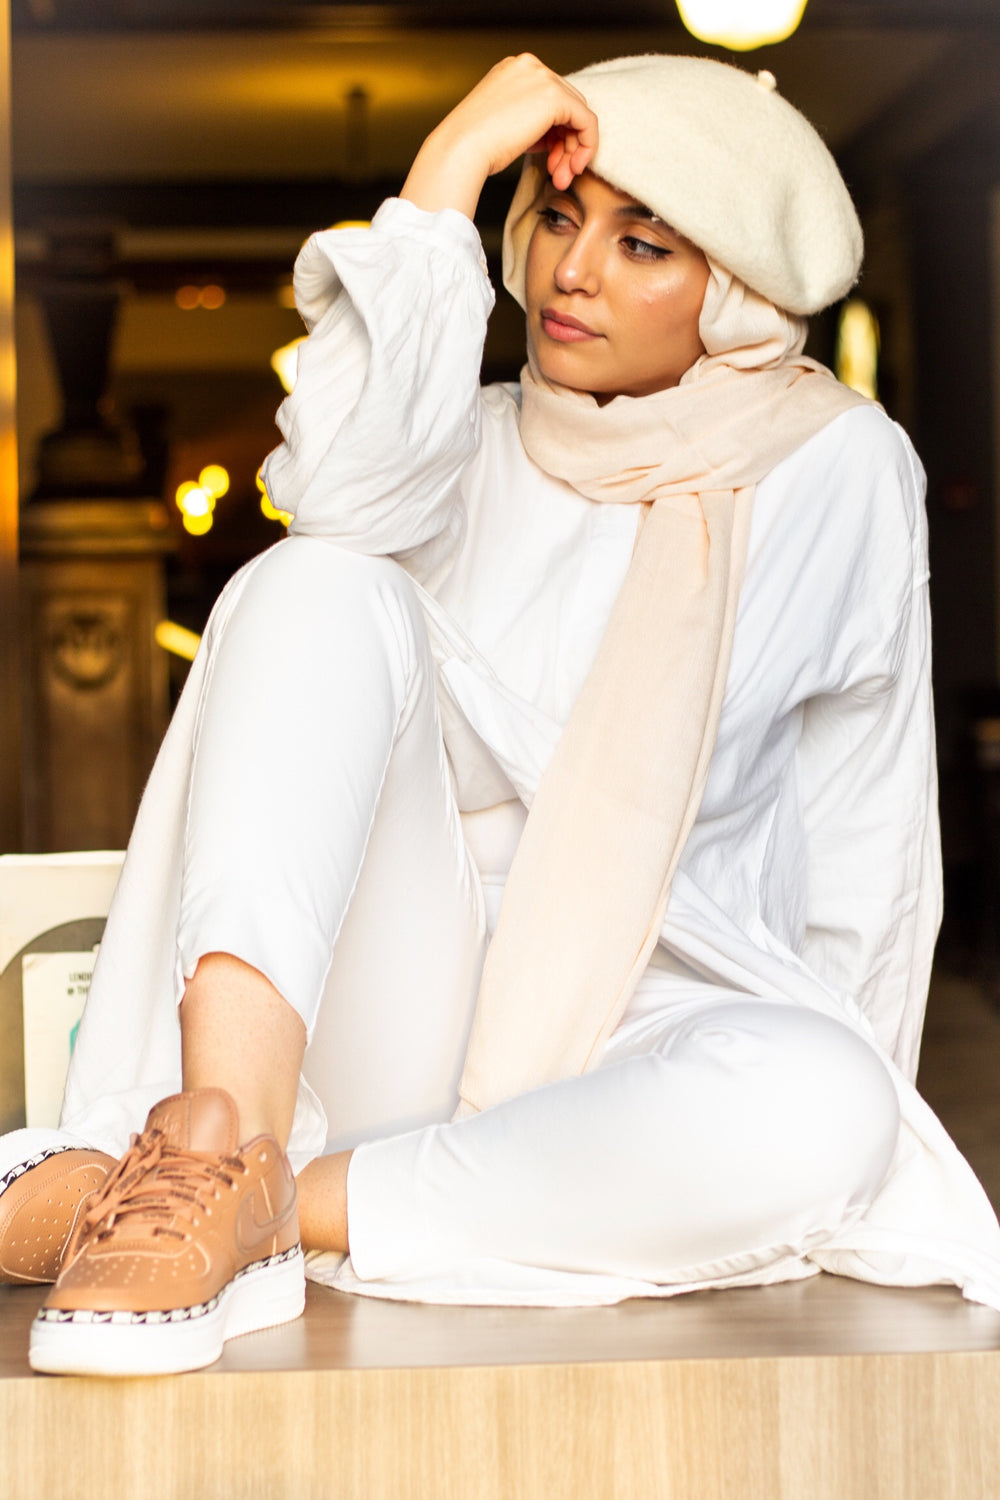 solid creme hijab with crepe texture